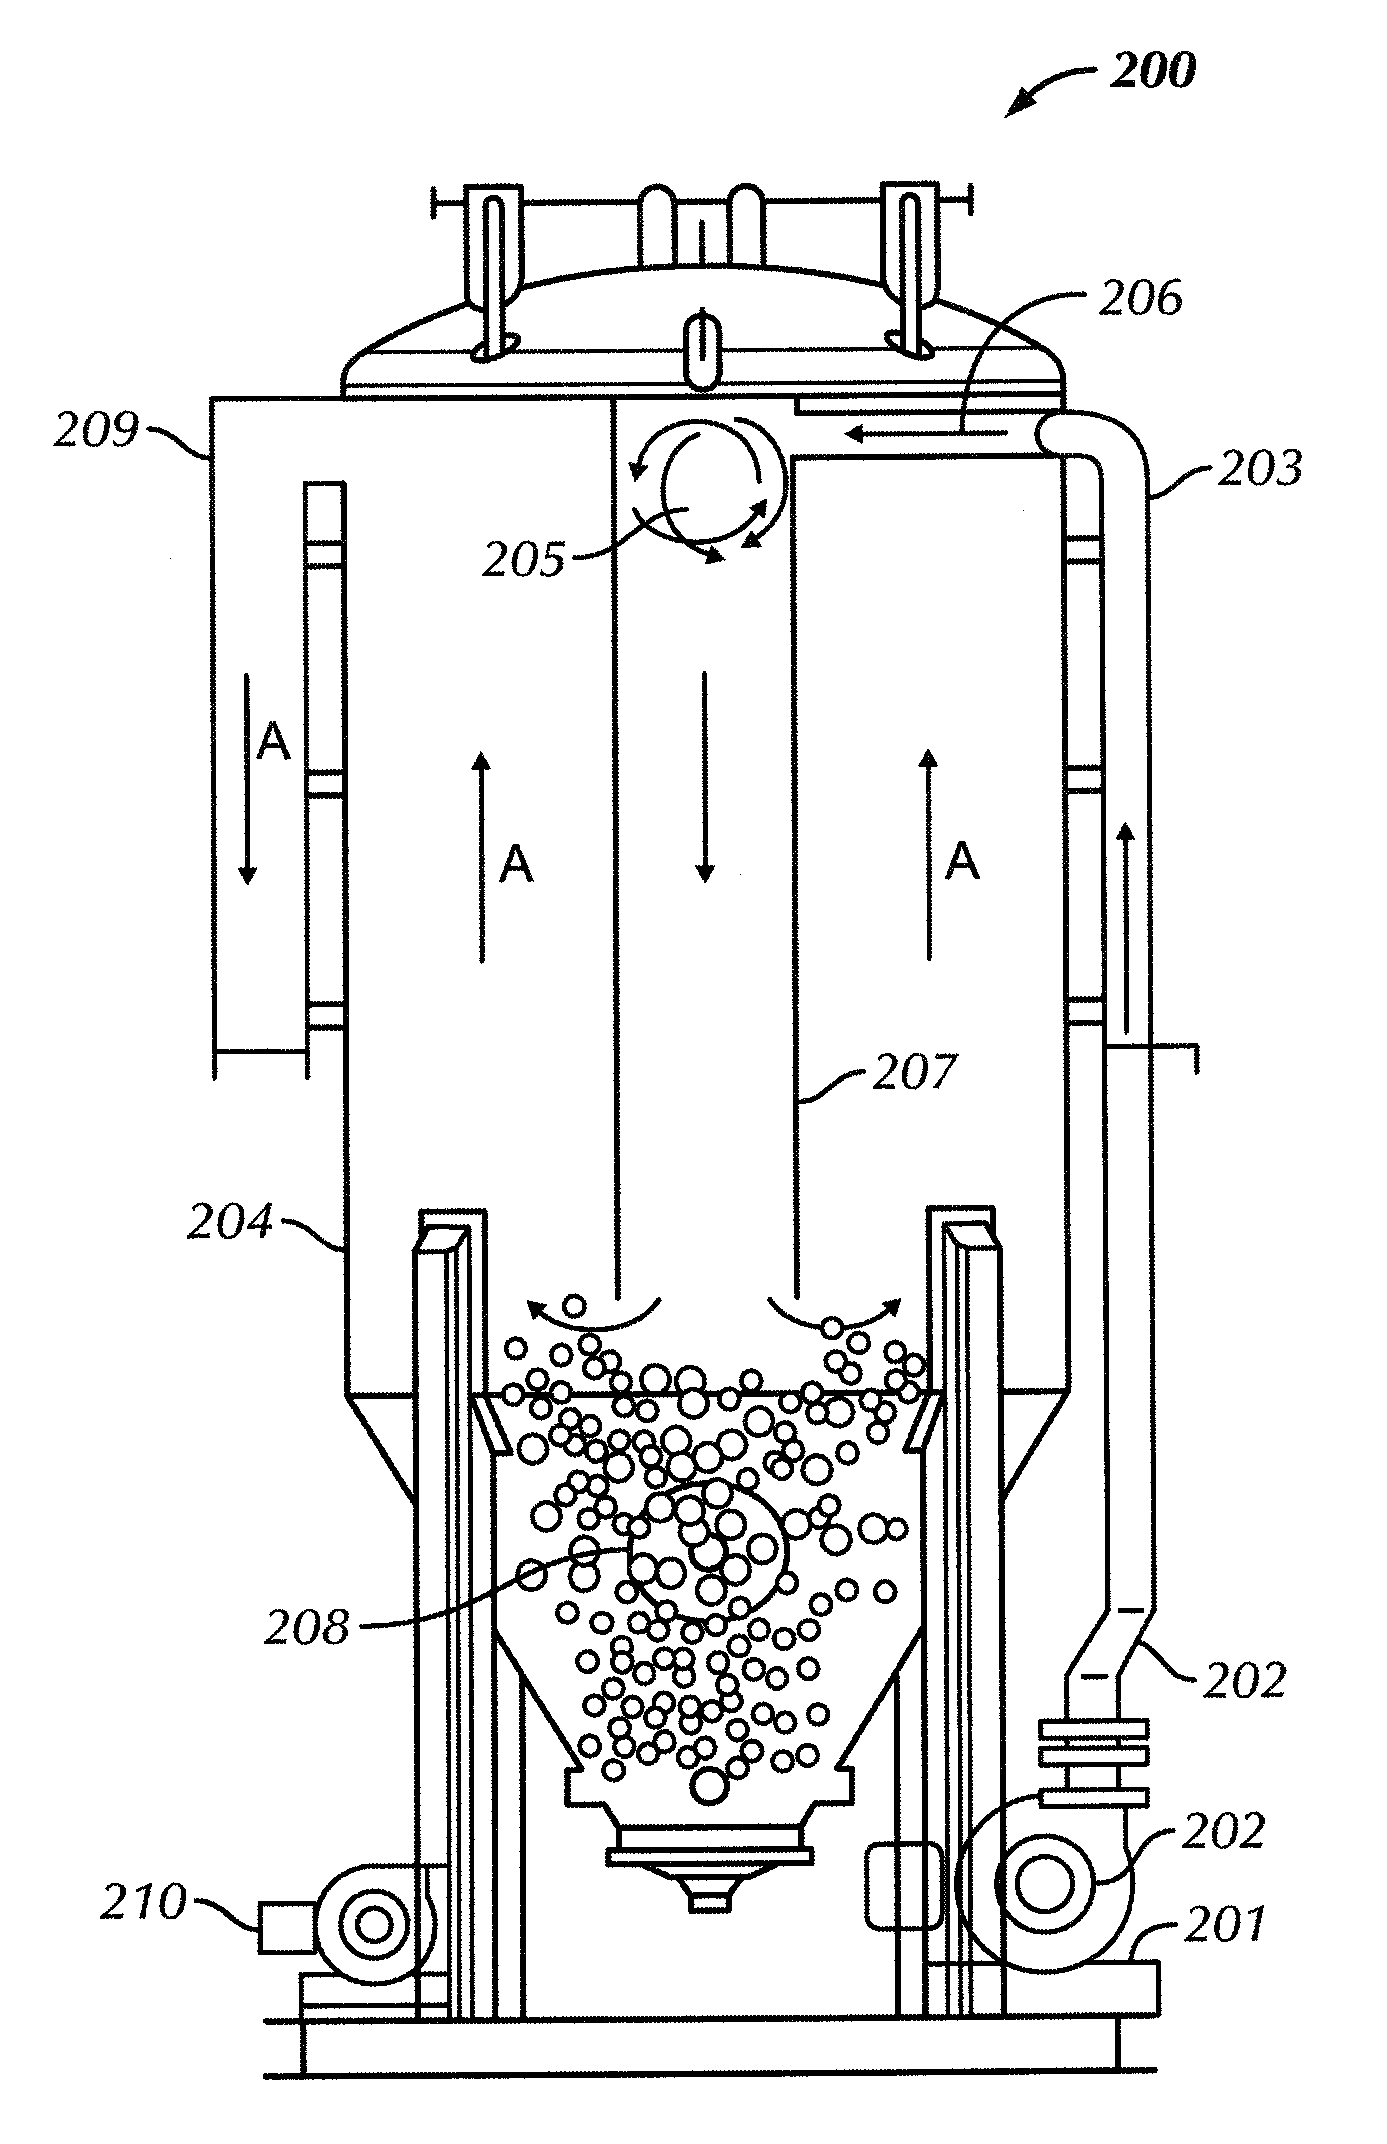 Dewatering system